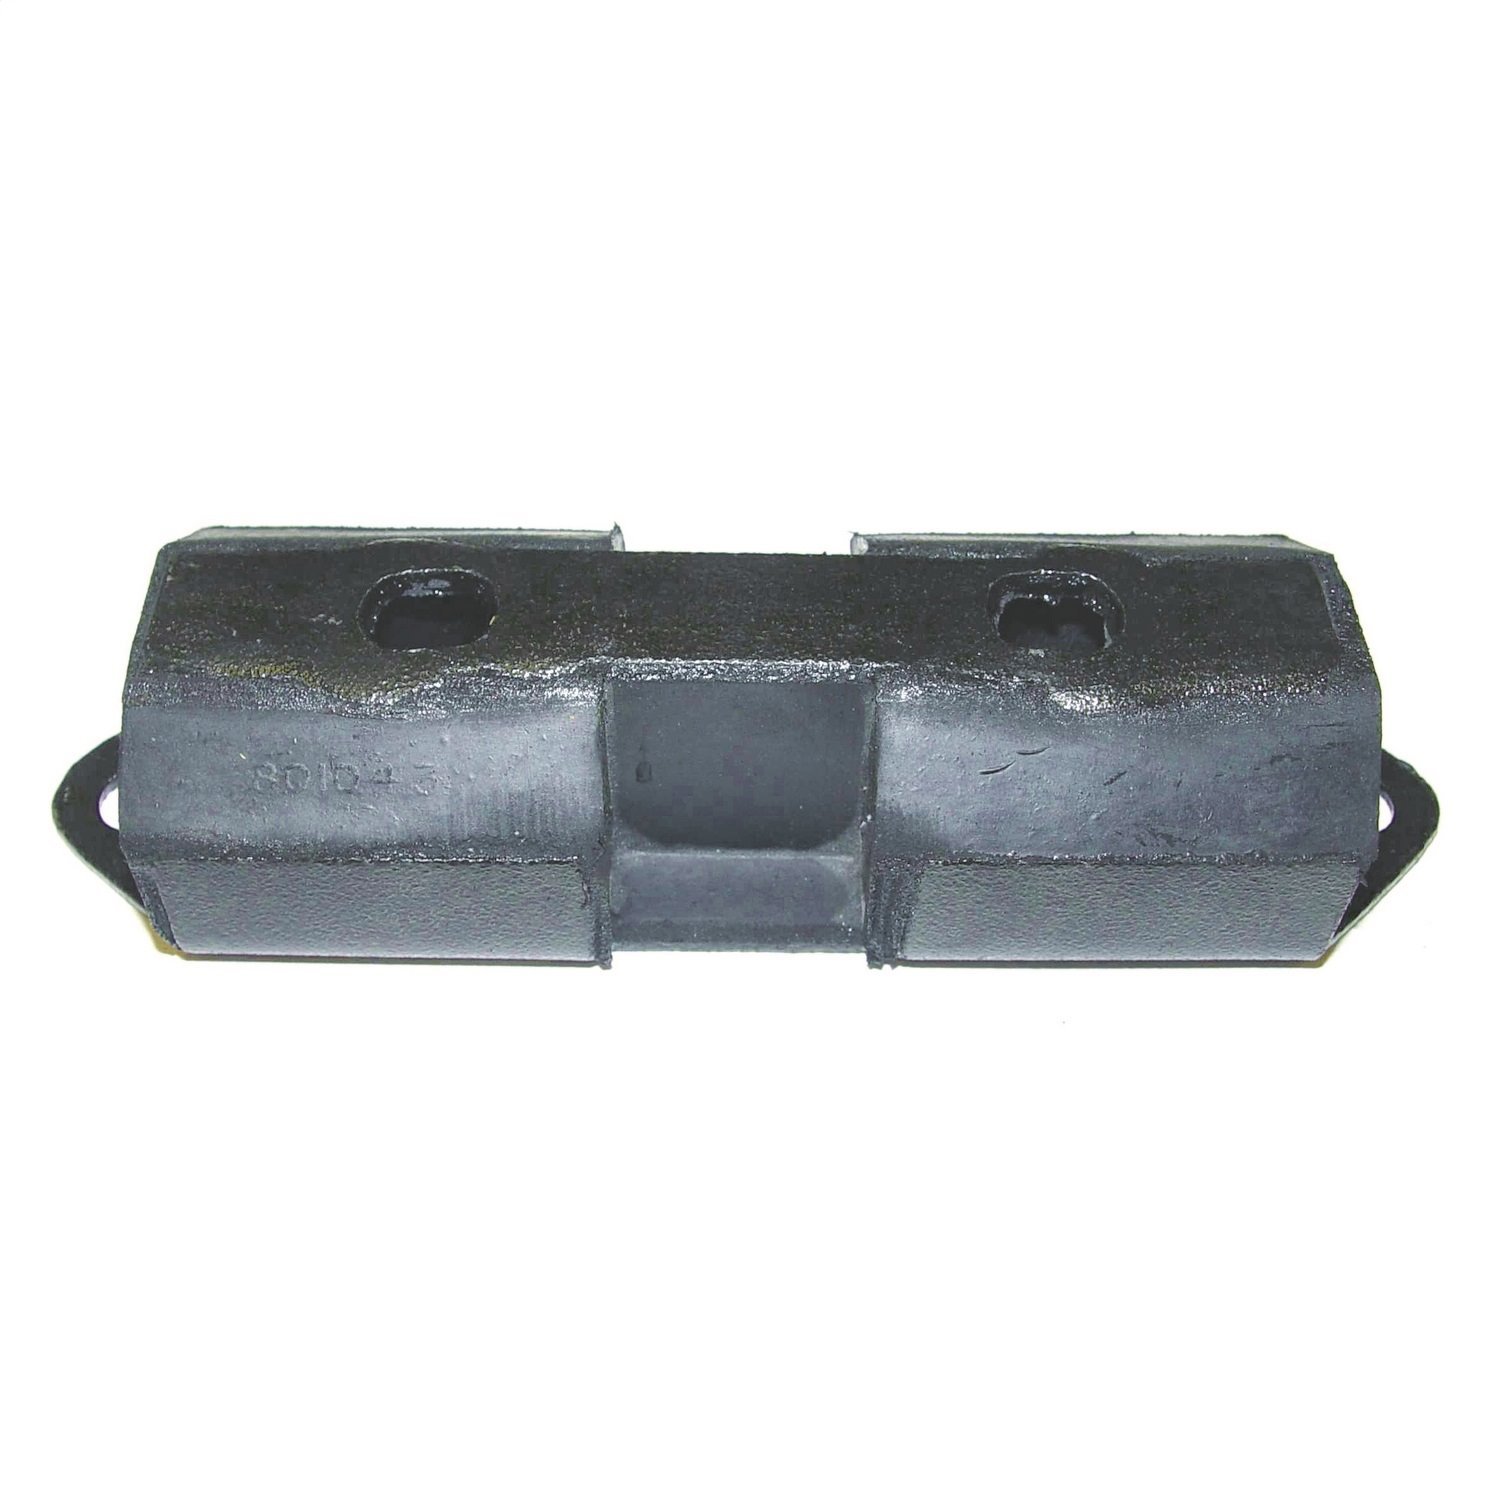 This rear transmission mount from Omix-ADA fits the T90 transmission found in 46-71 Willys and Jeep models.